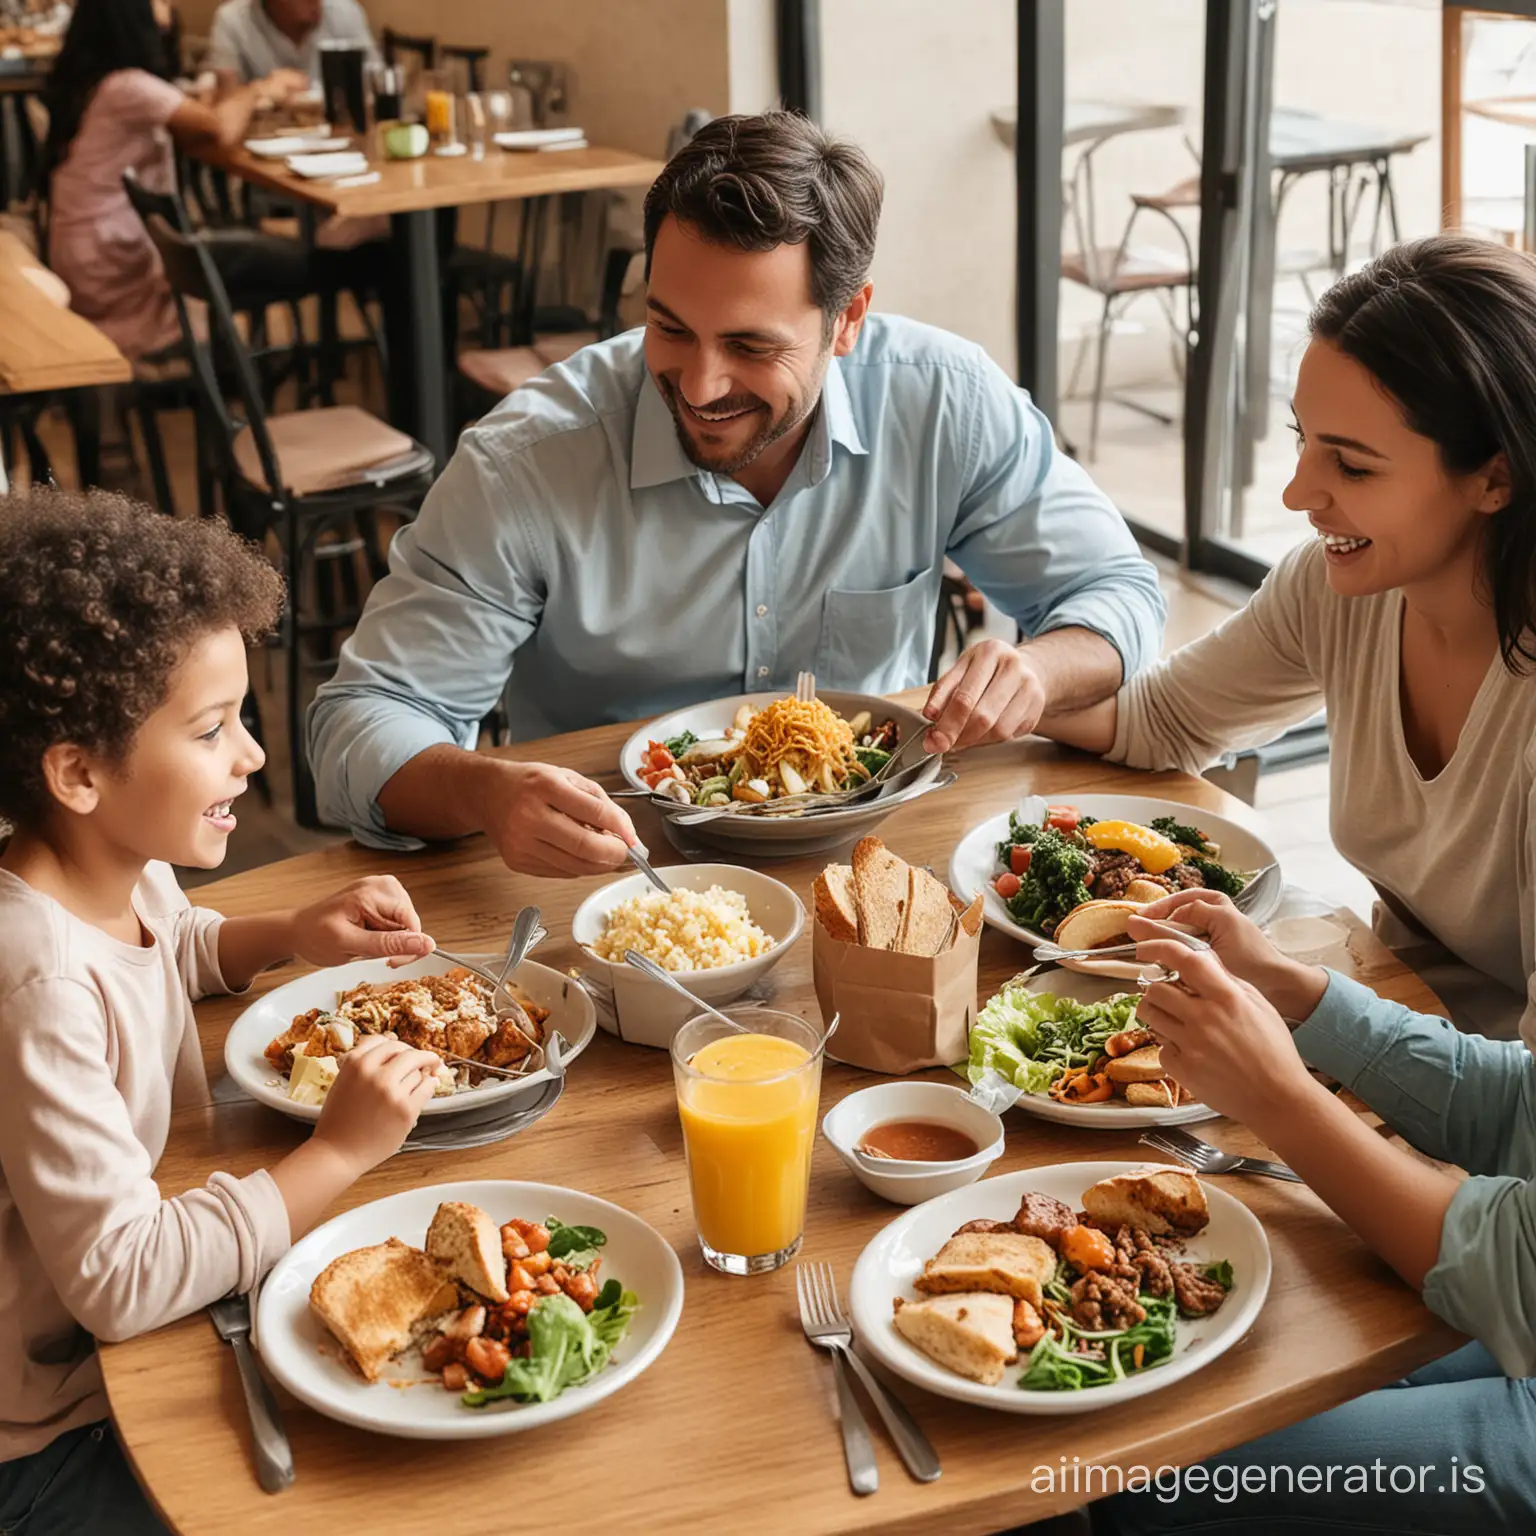 Multigenerational-Family-Enjoying-Lunch-Together-at-a-Cozy-Restaurant